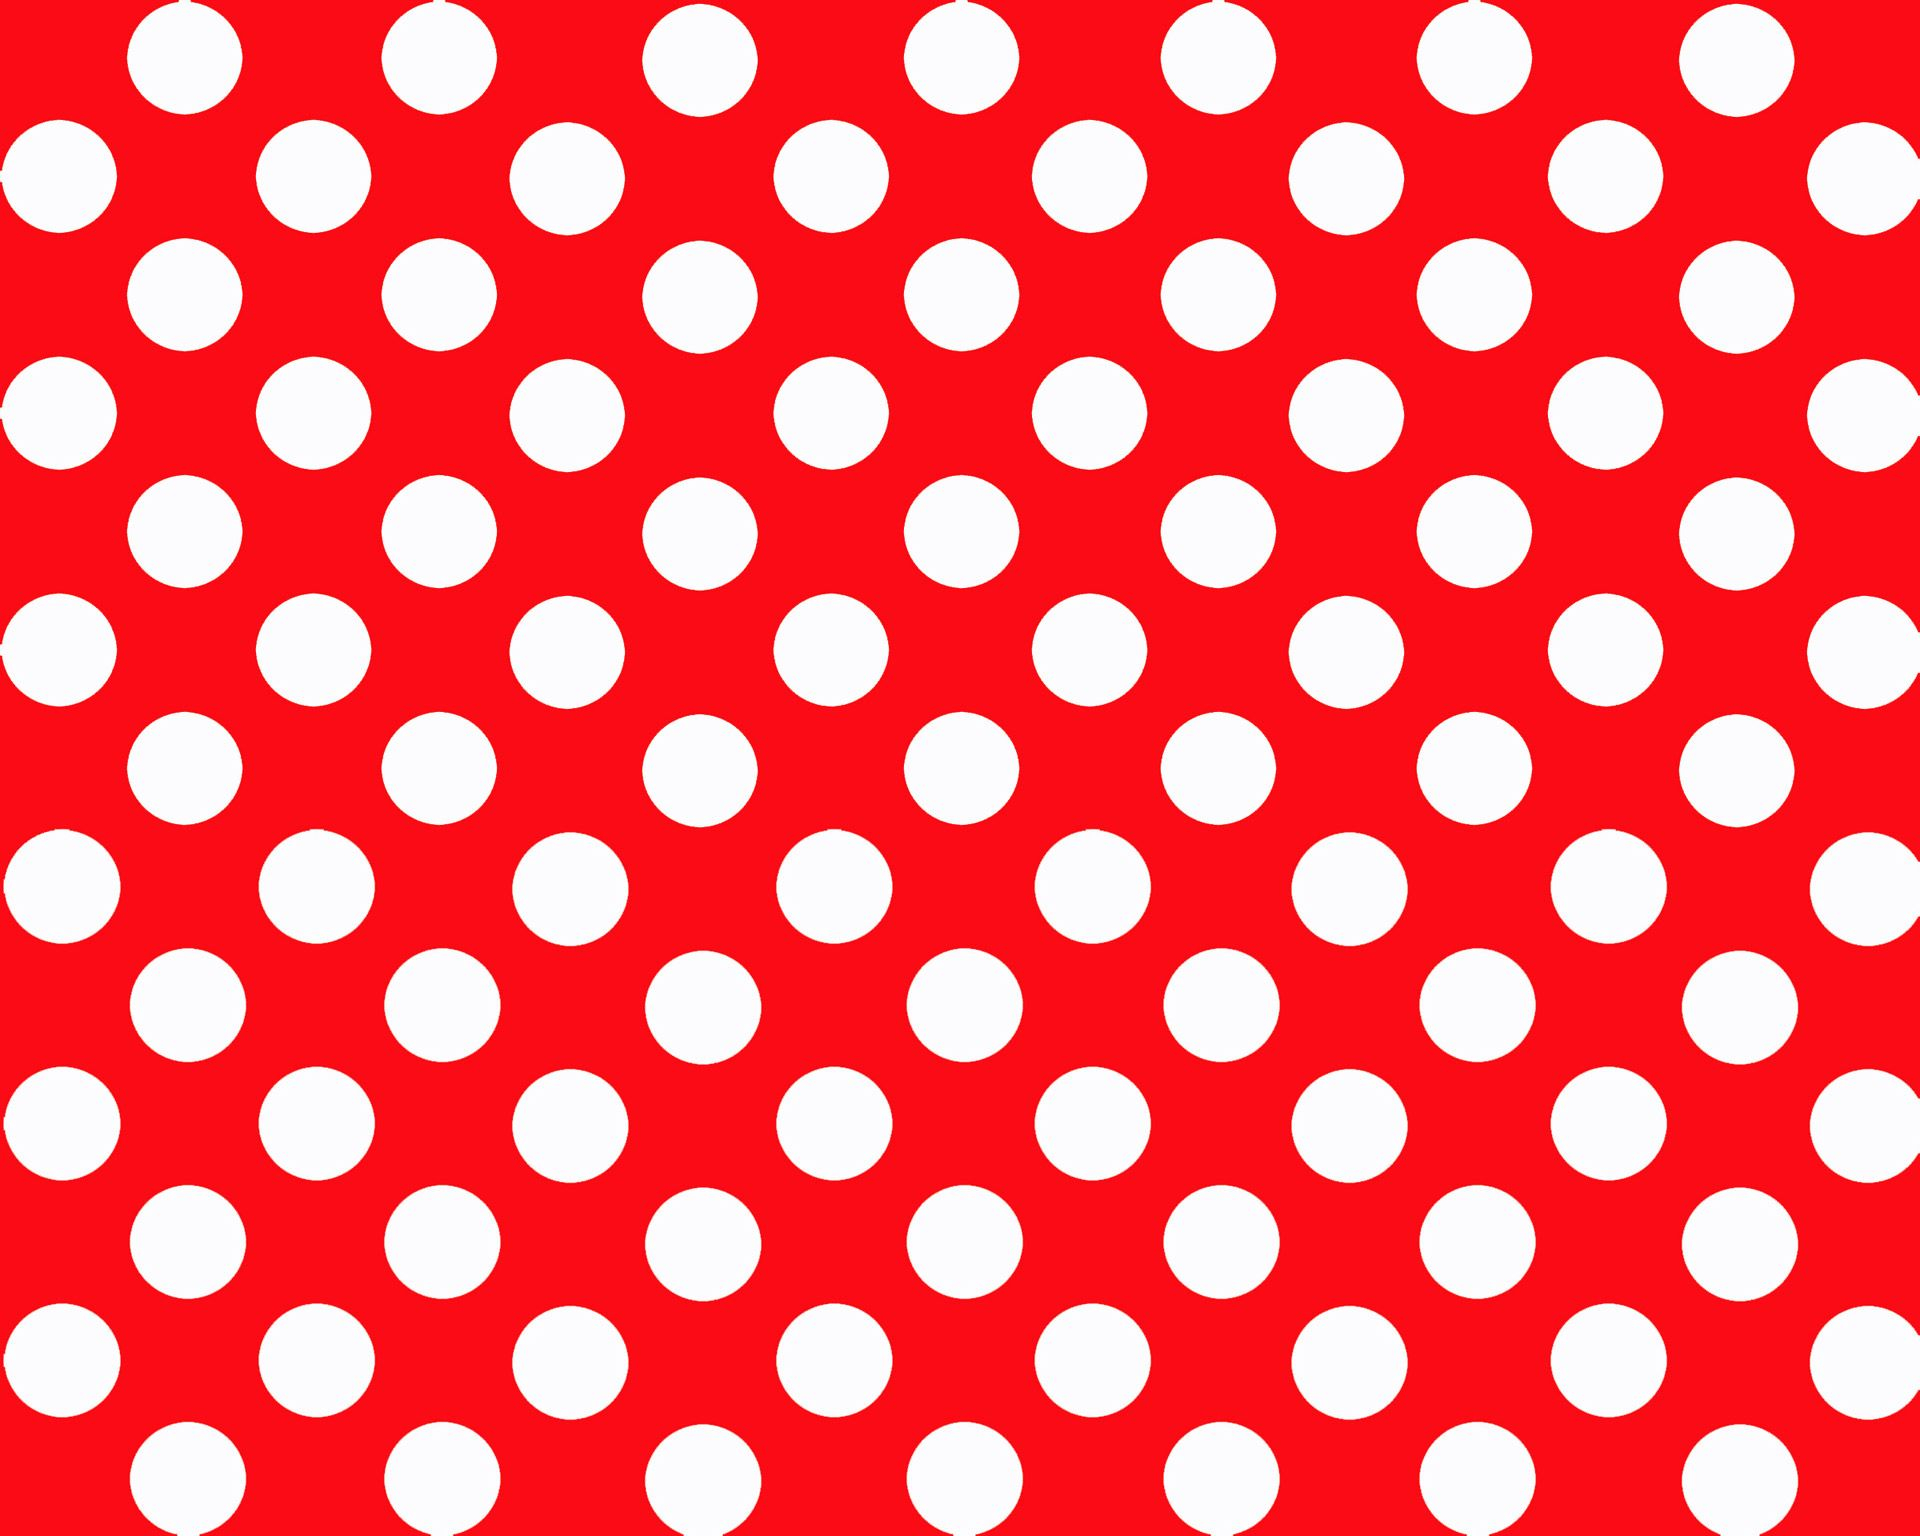 1920x1536 Red and White Polka Dot Wallpapers Top Free Red and White Polka Dot Backgrounds